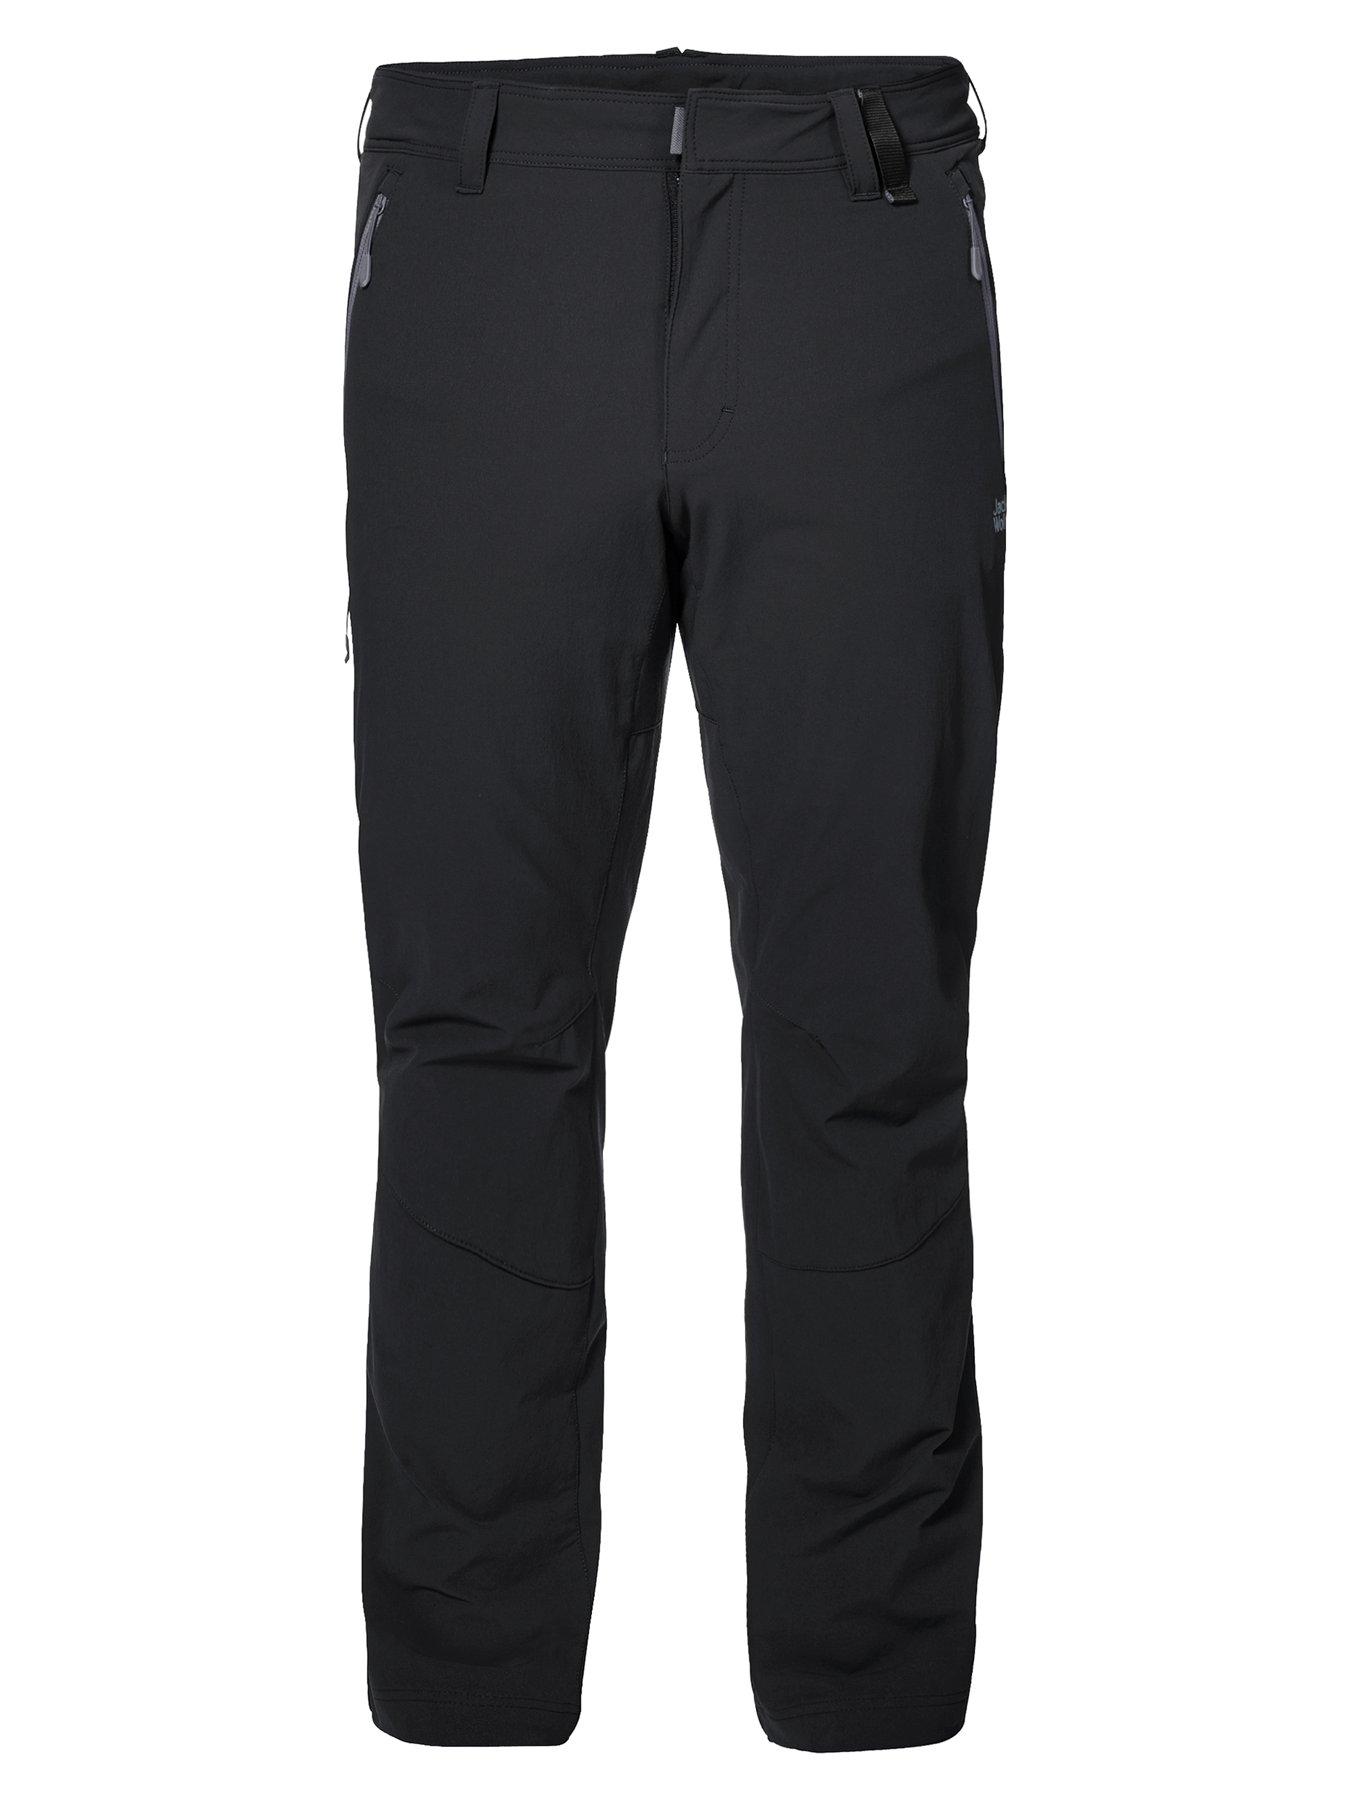 Joggers Active X Trousers - Black